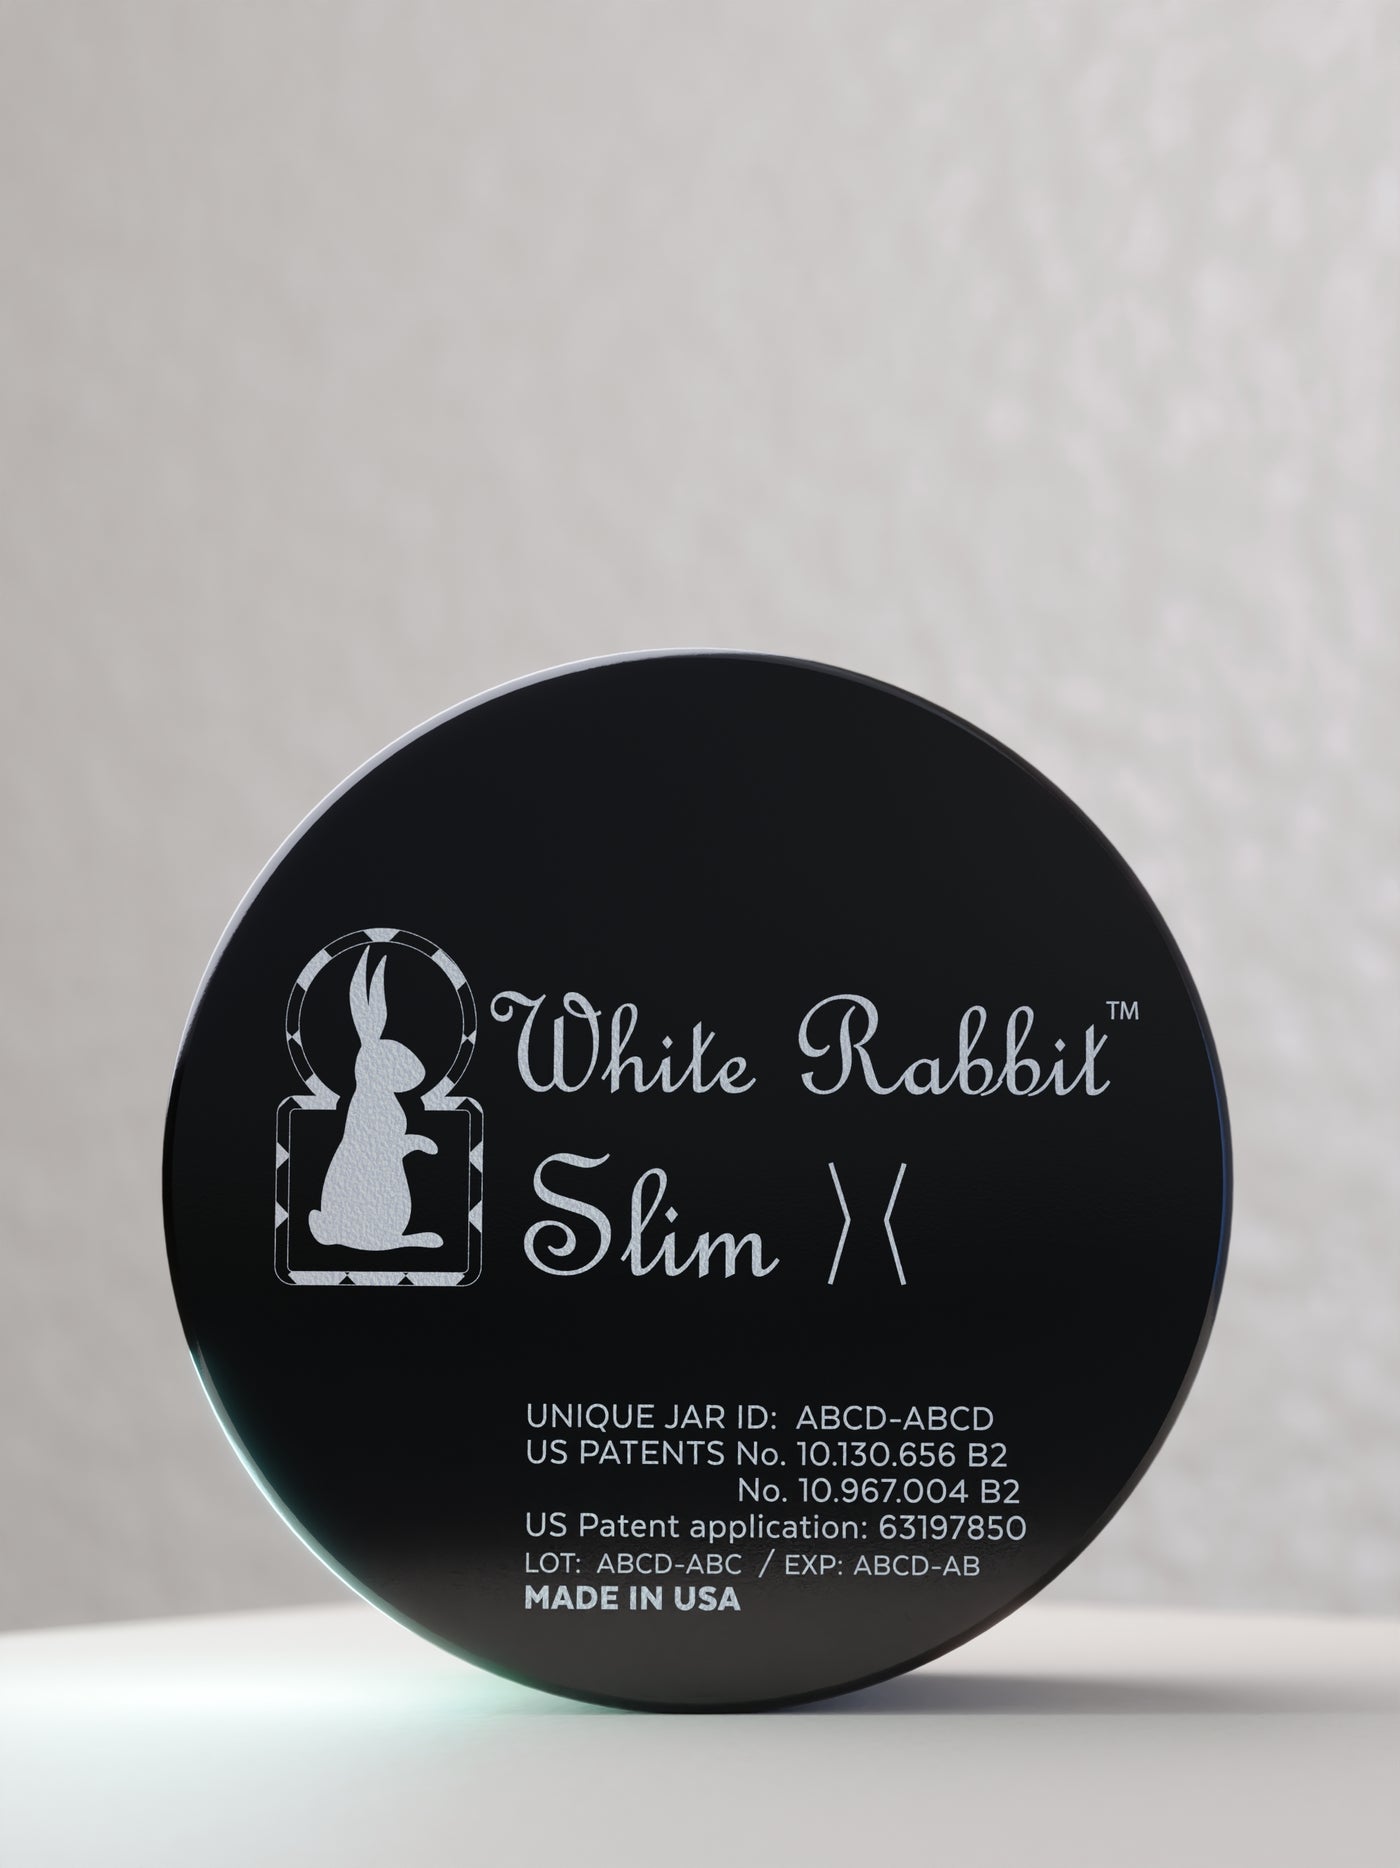 White Rabbit Slim. Metabolism Mastery for Healthy Weight.